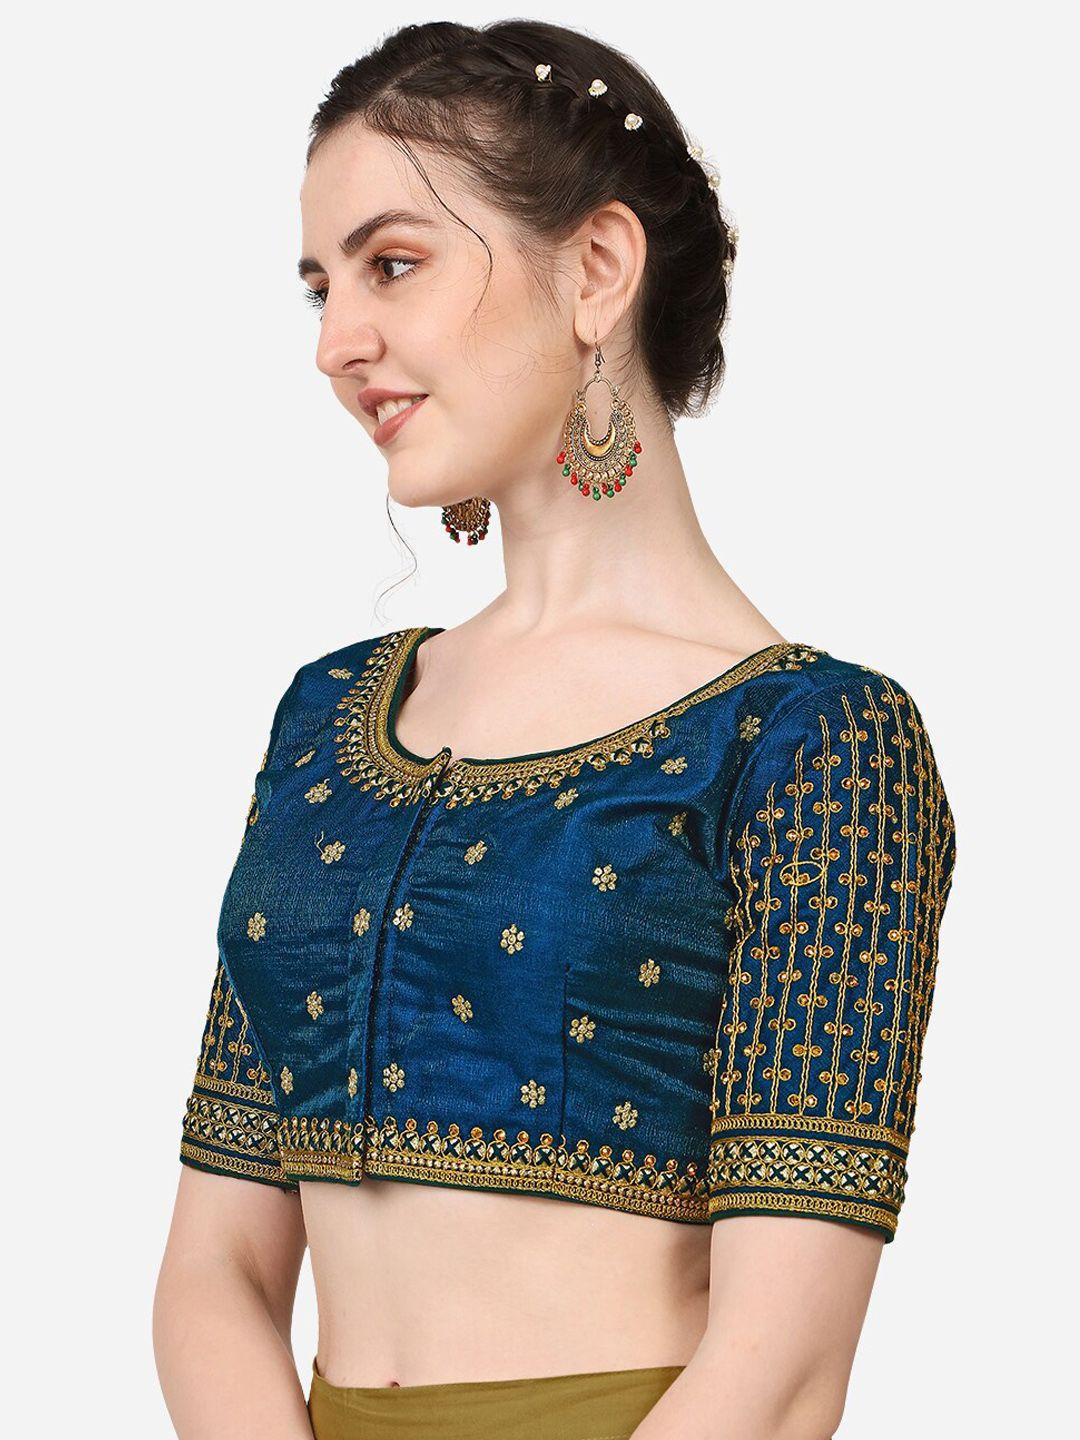 pujia-mills-teal-blue-&-gold-coloured-embroidered-saree-blouse